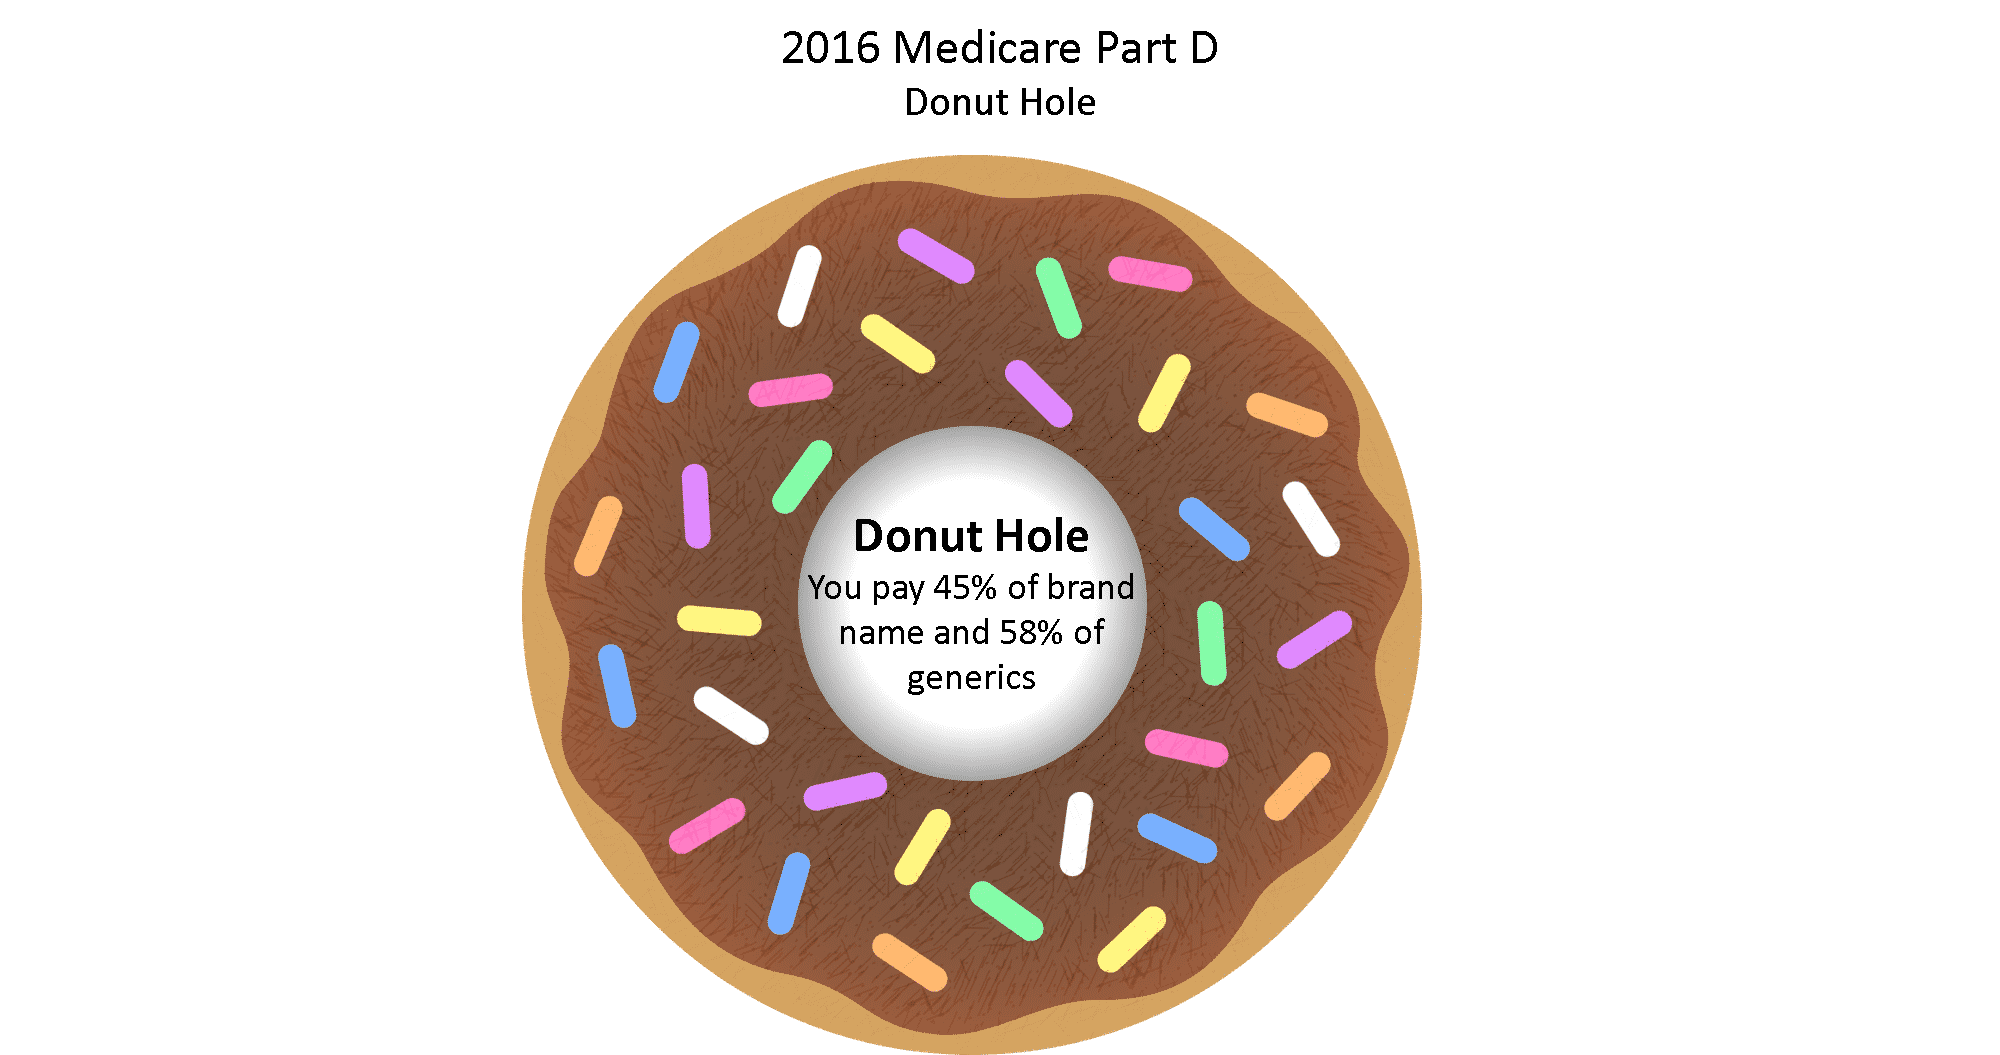 What is the Prescription Donut Hole?